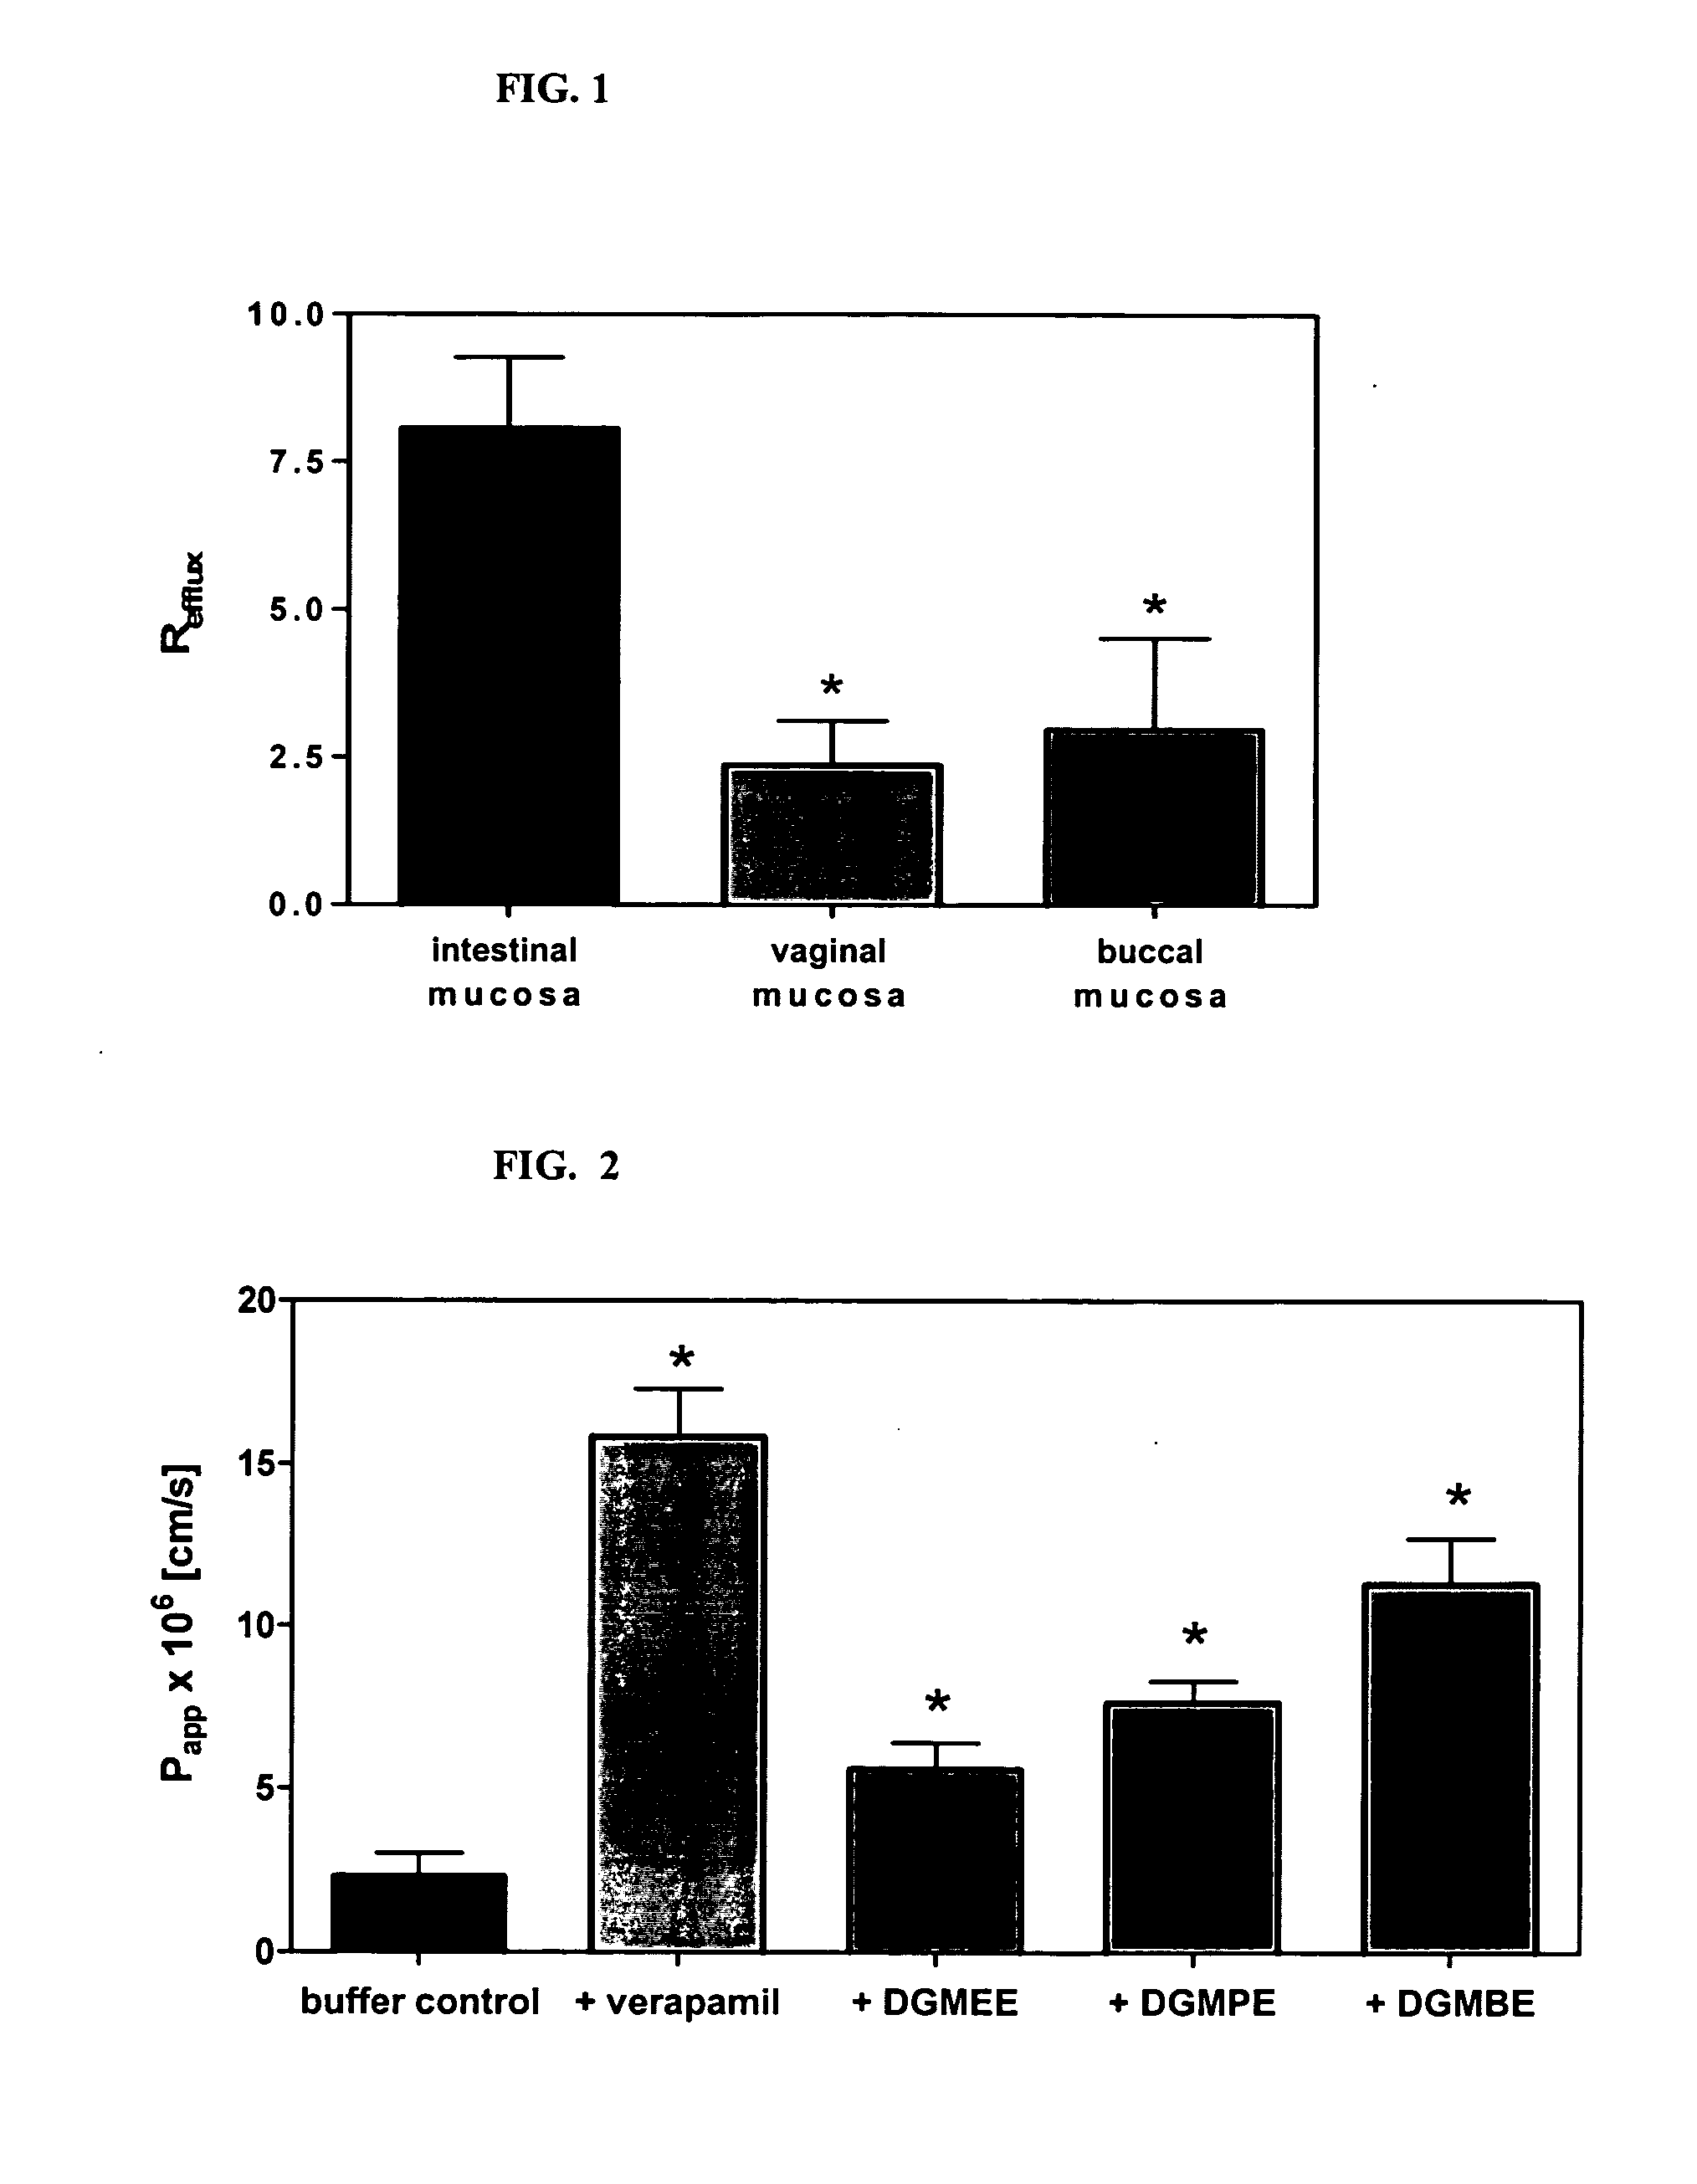 Method for augmentation of intraepithelial and systemic exposure of therapeutic agents having substrate activity for cytochrome P450 enzymes and membrane efflux systems following vaginal and oral cavity administration